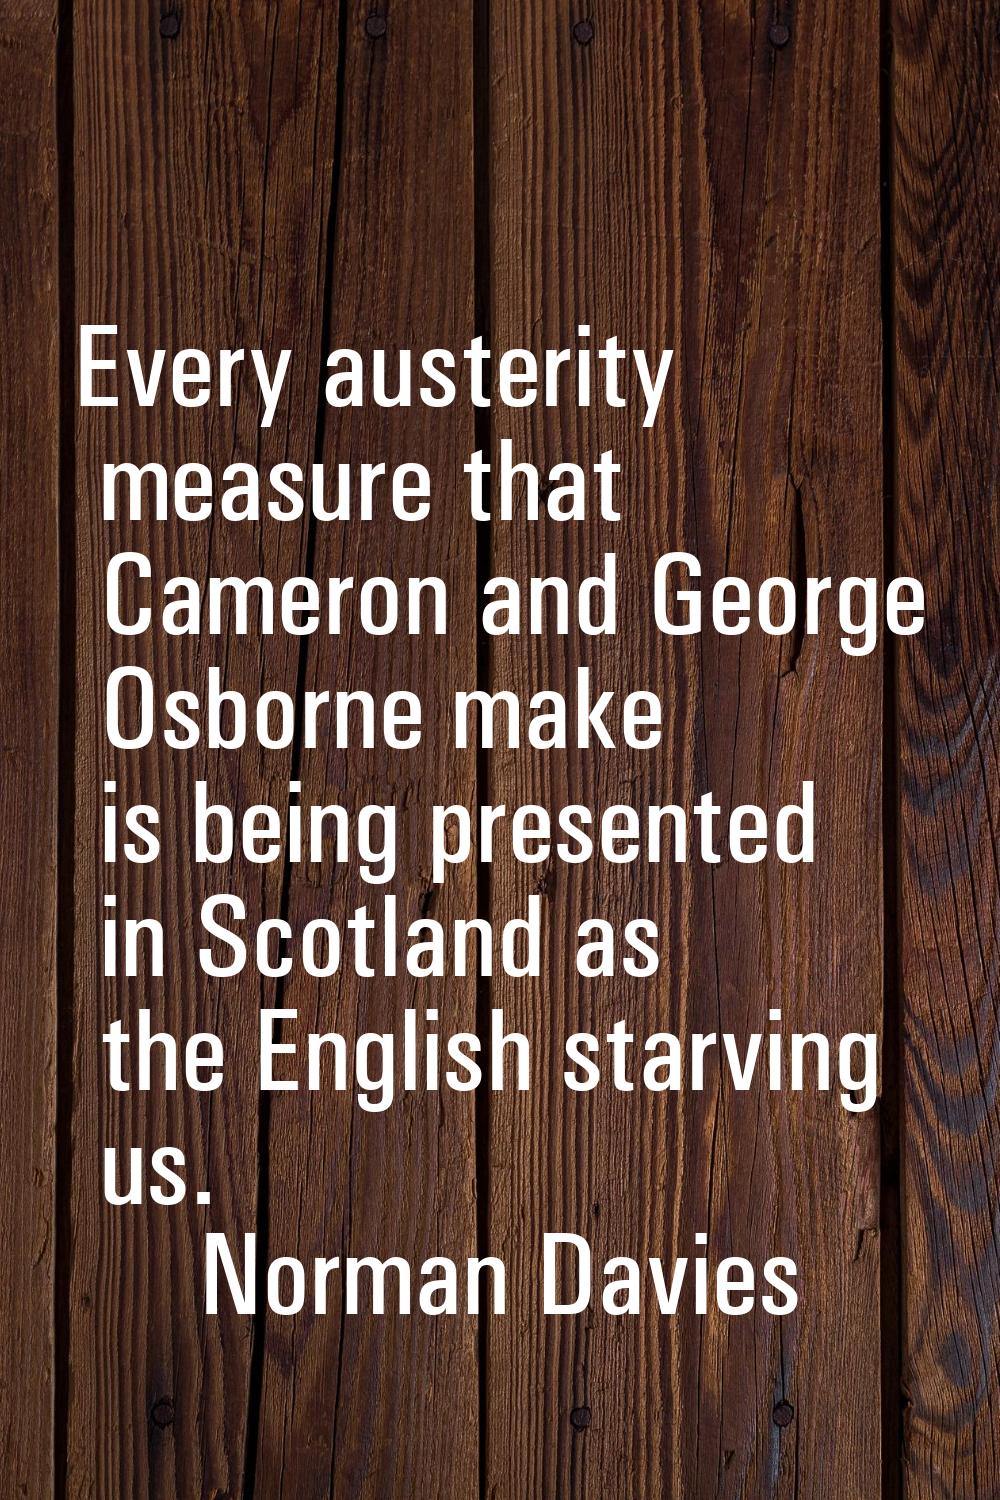 Every austerity measure that Cameron and George Osborne make is being presented in Scotland as the 